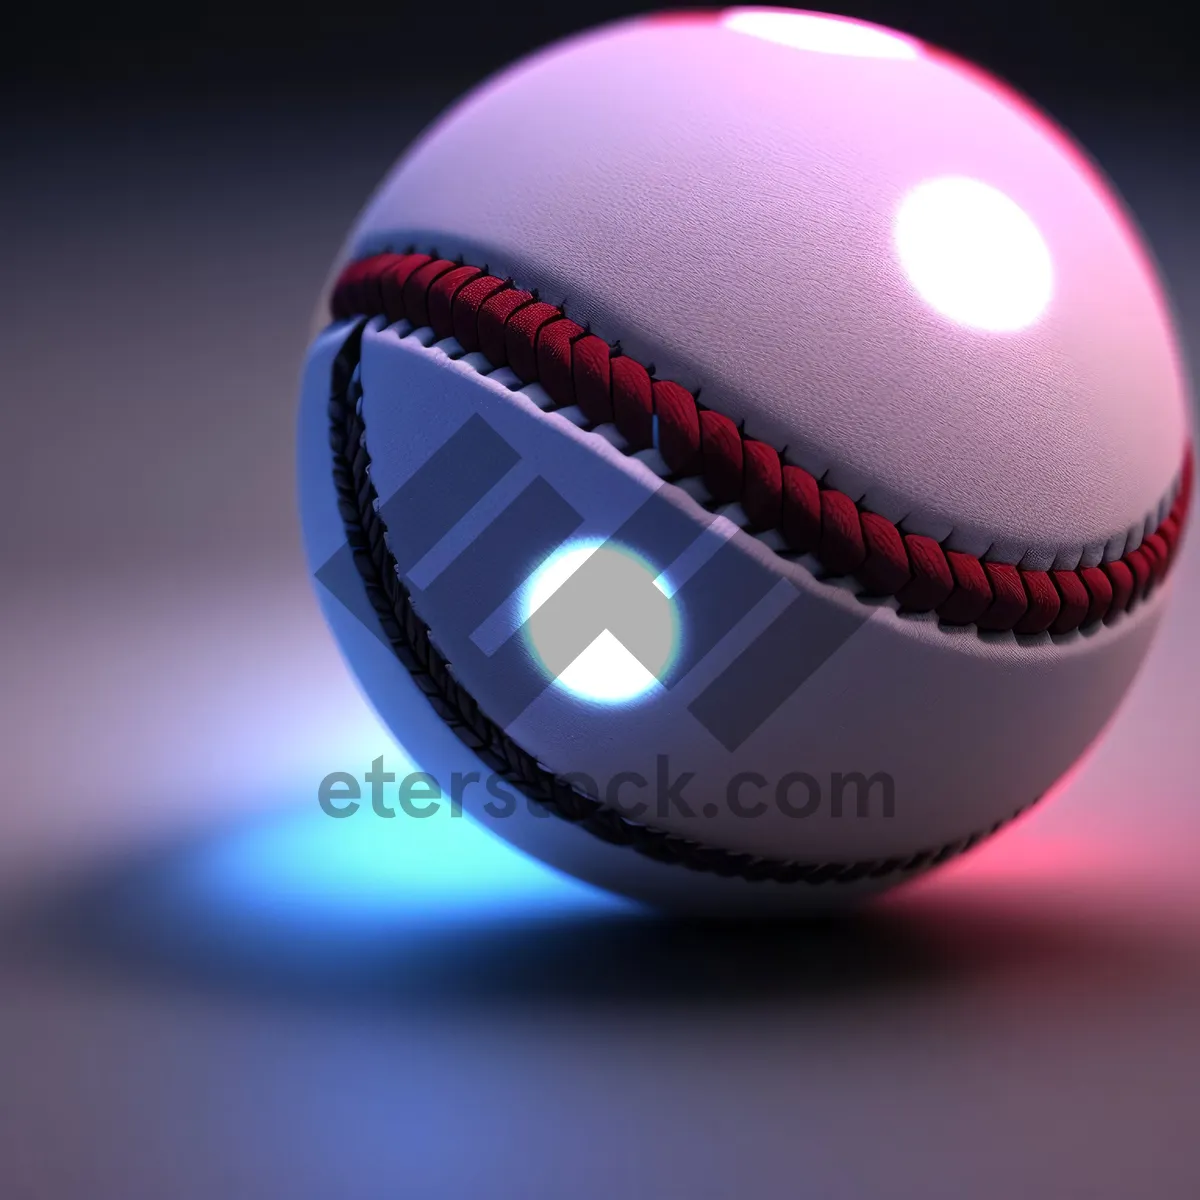 Picture of Ball of Light: Microscopic Sphere under Hand Glass